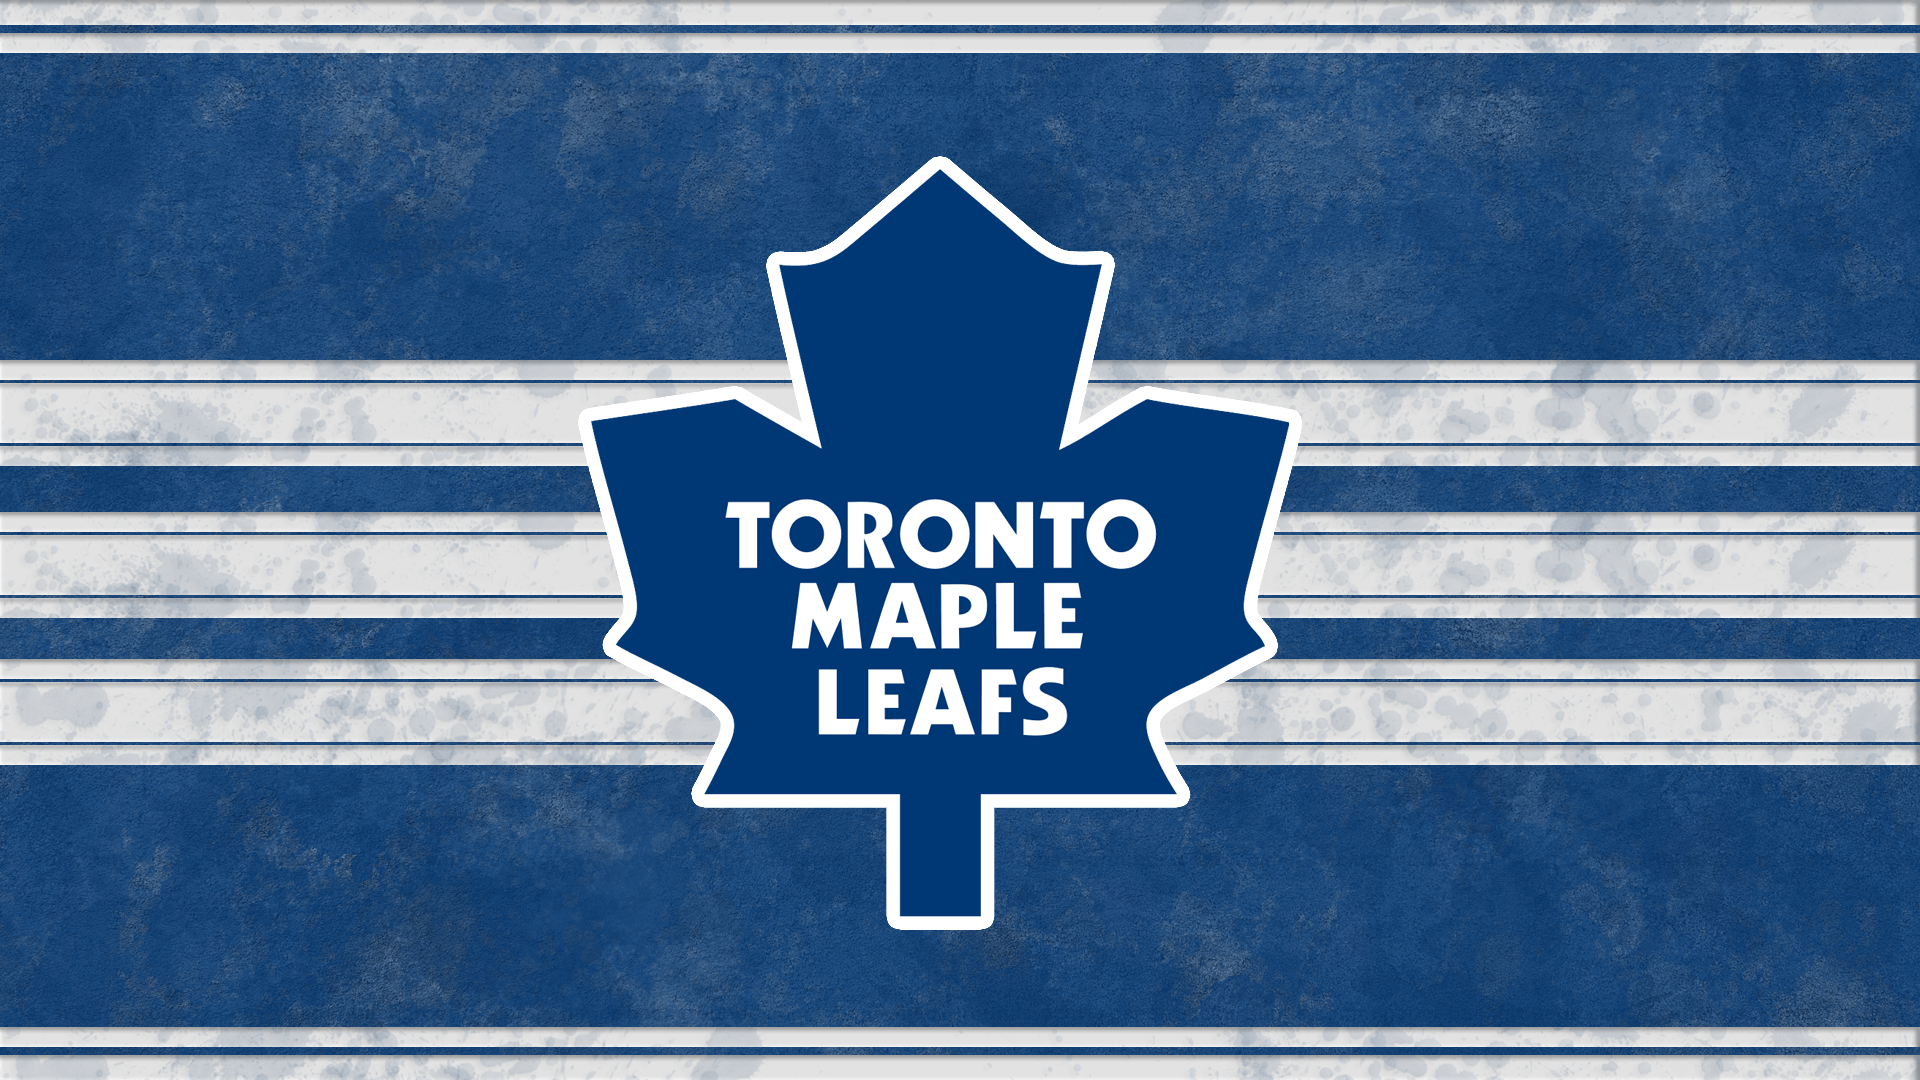 Toronto Maple Leafs 2018 Wallpaper (69+ pictures)